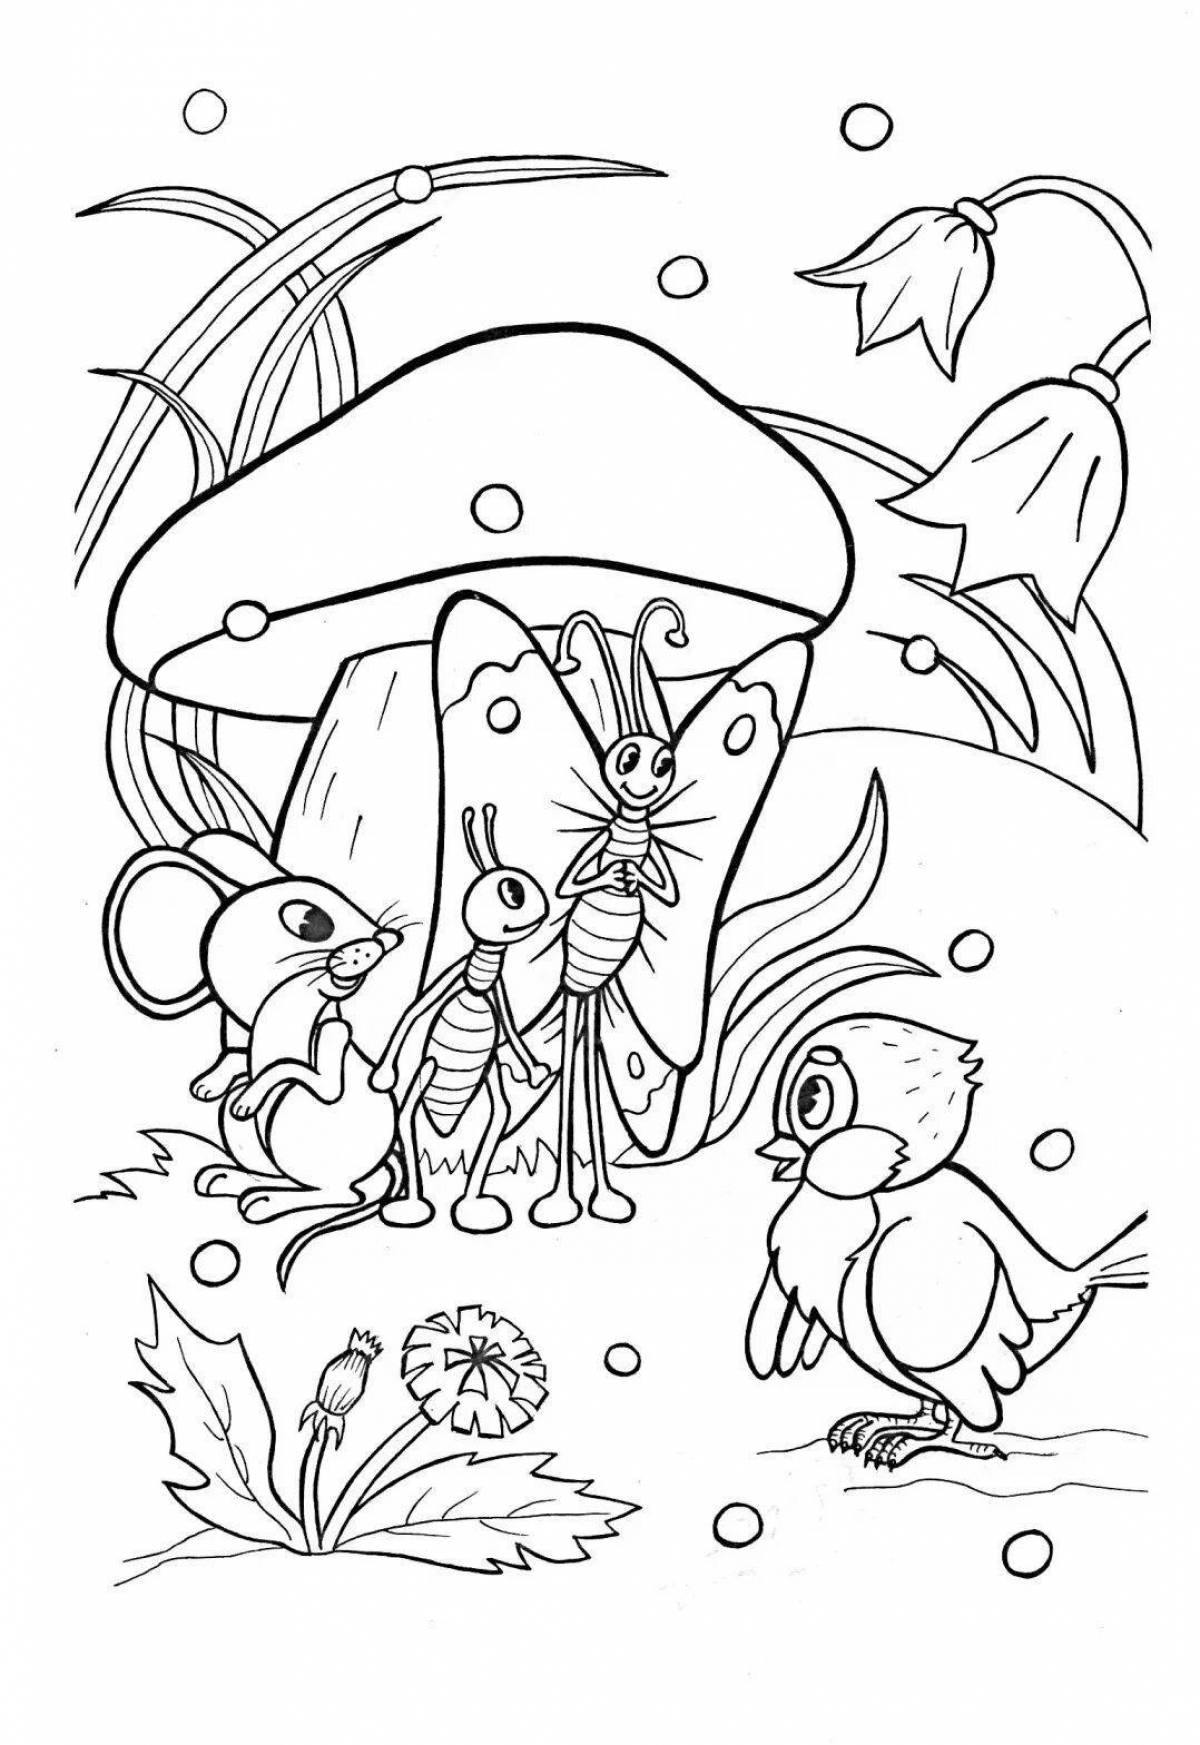 Glorious fairy tale coloring page illustration